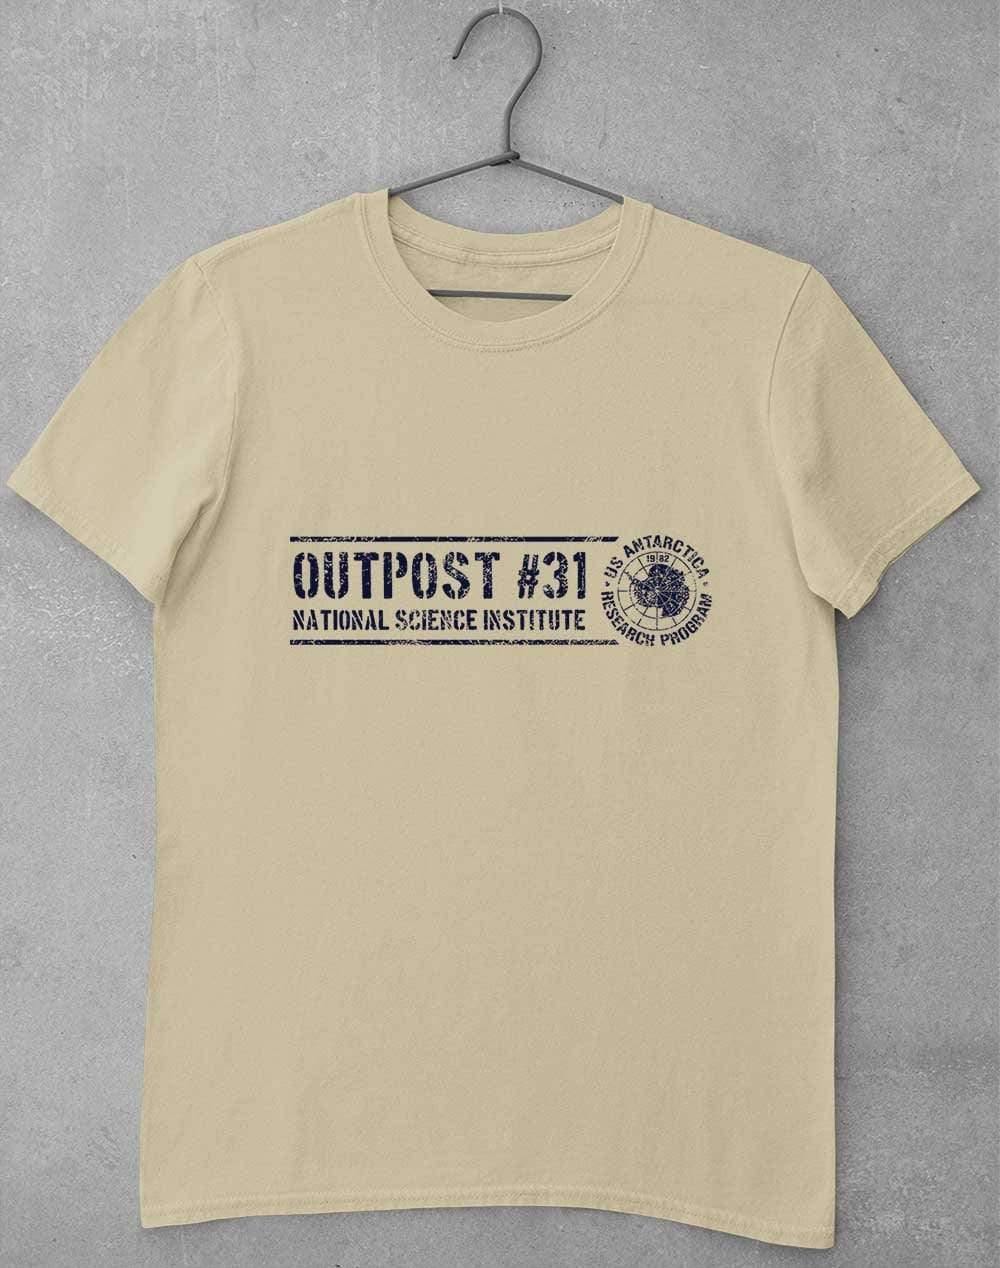 Outpost 31 Antarctica T-Shirt S / Sand  - Off World Tees